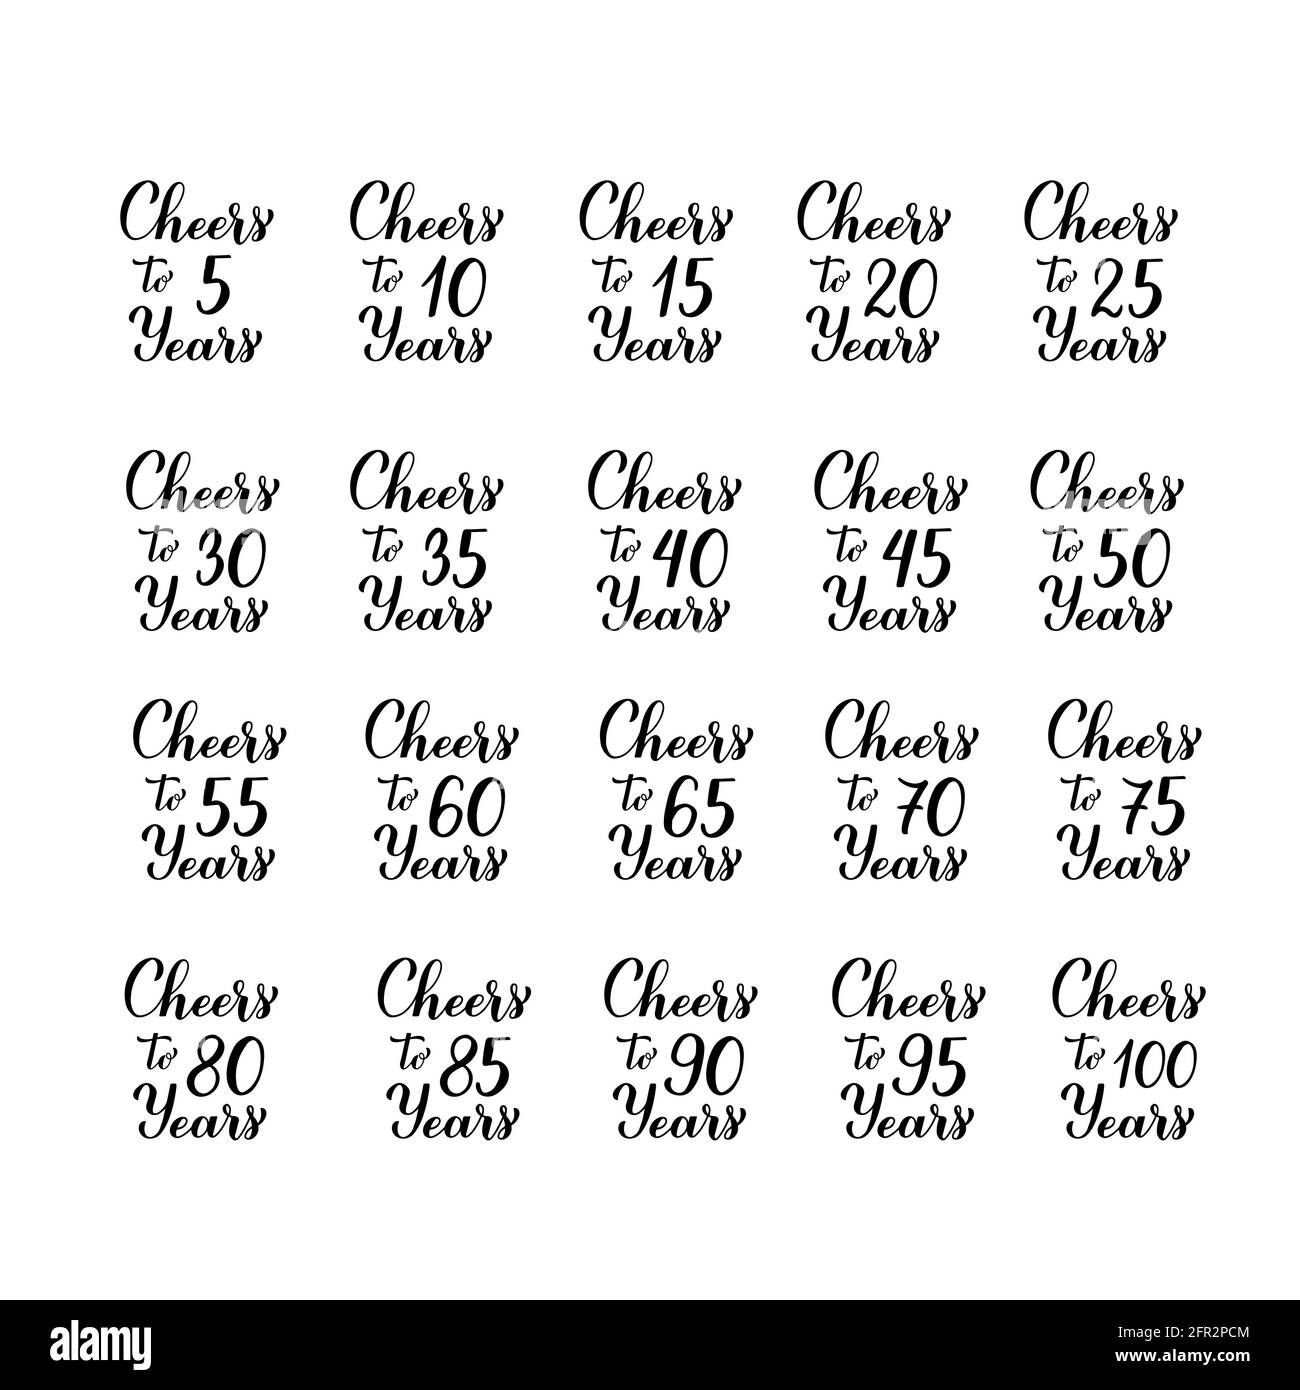 Cheers to years lettering. Set of 5, 10, 20, 25, 30, 35, 40, 45, 50, 55, 60, 65, 70, 75, 80, 85, 90, 95 and 100 Birthday or Anniversary celebration ca Stock Vector